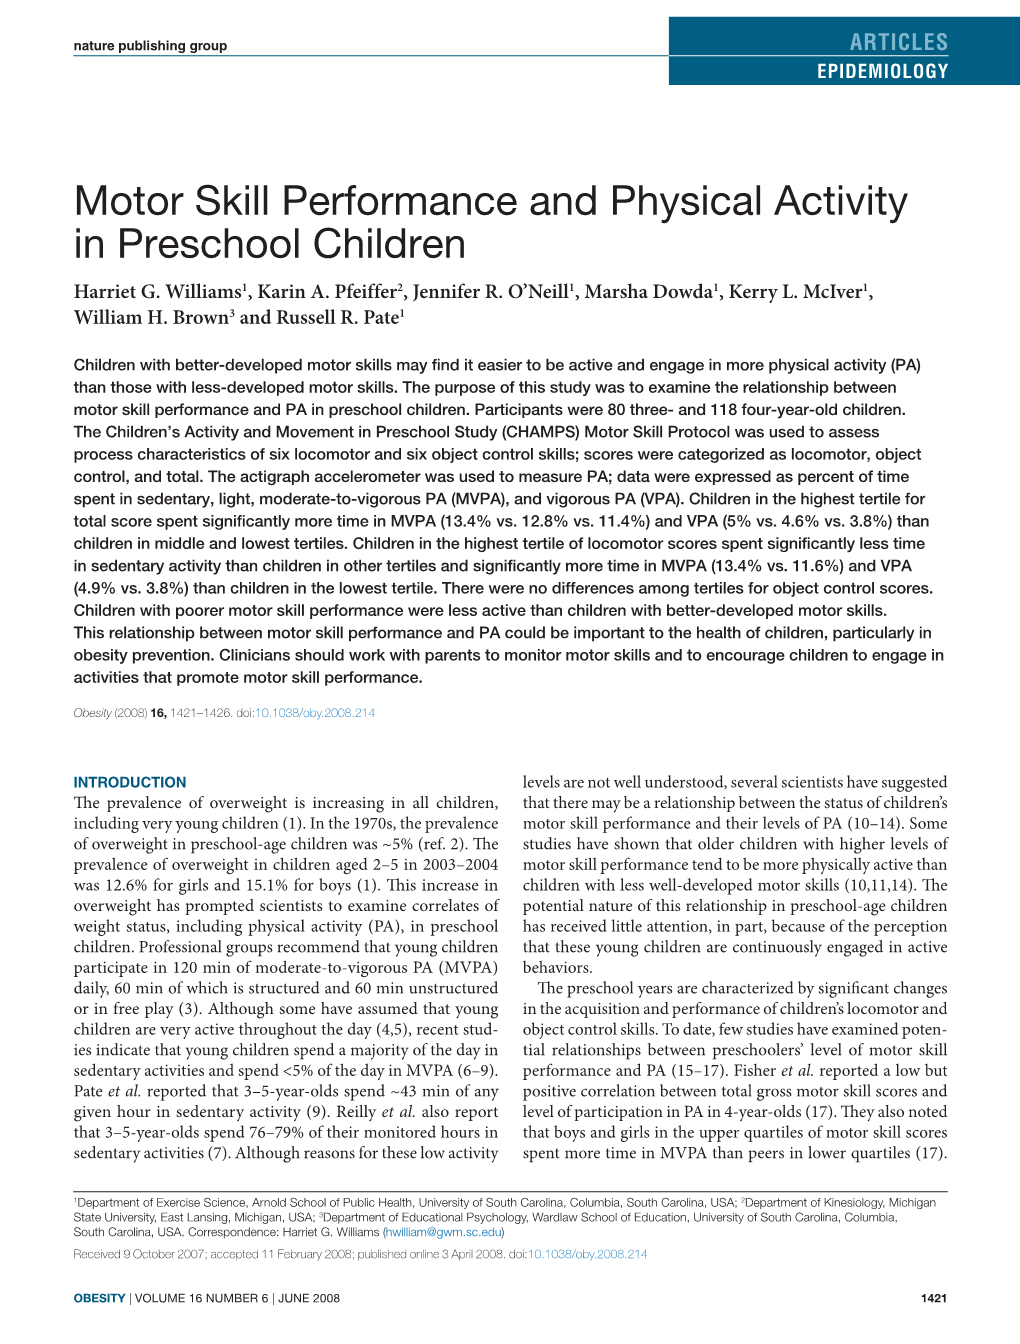 Motor Skill Performance and Physical Activity in Preschool Children Harriet G